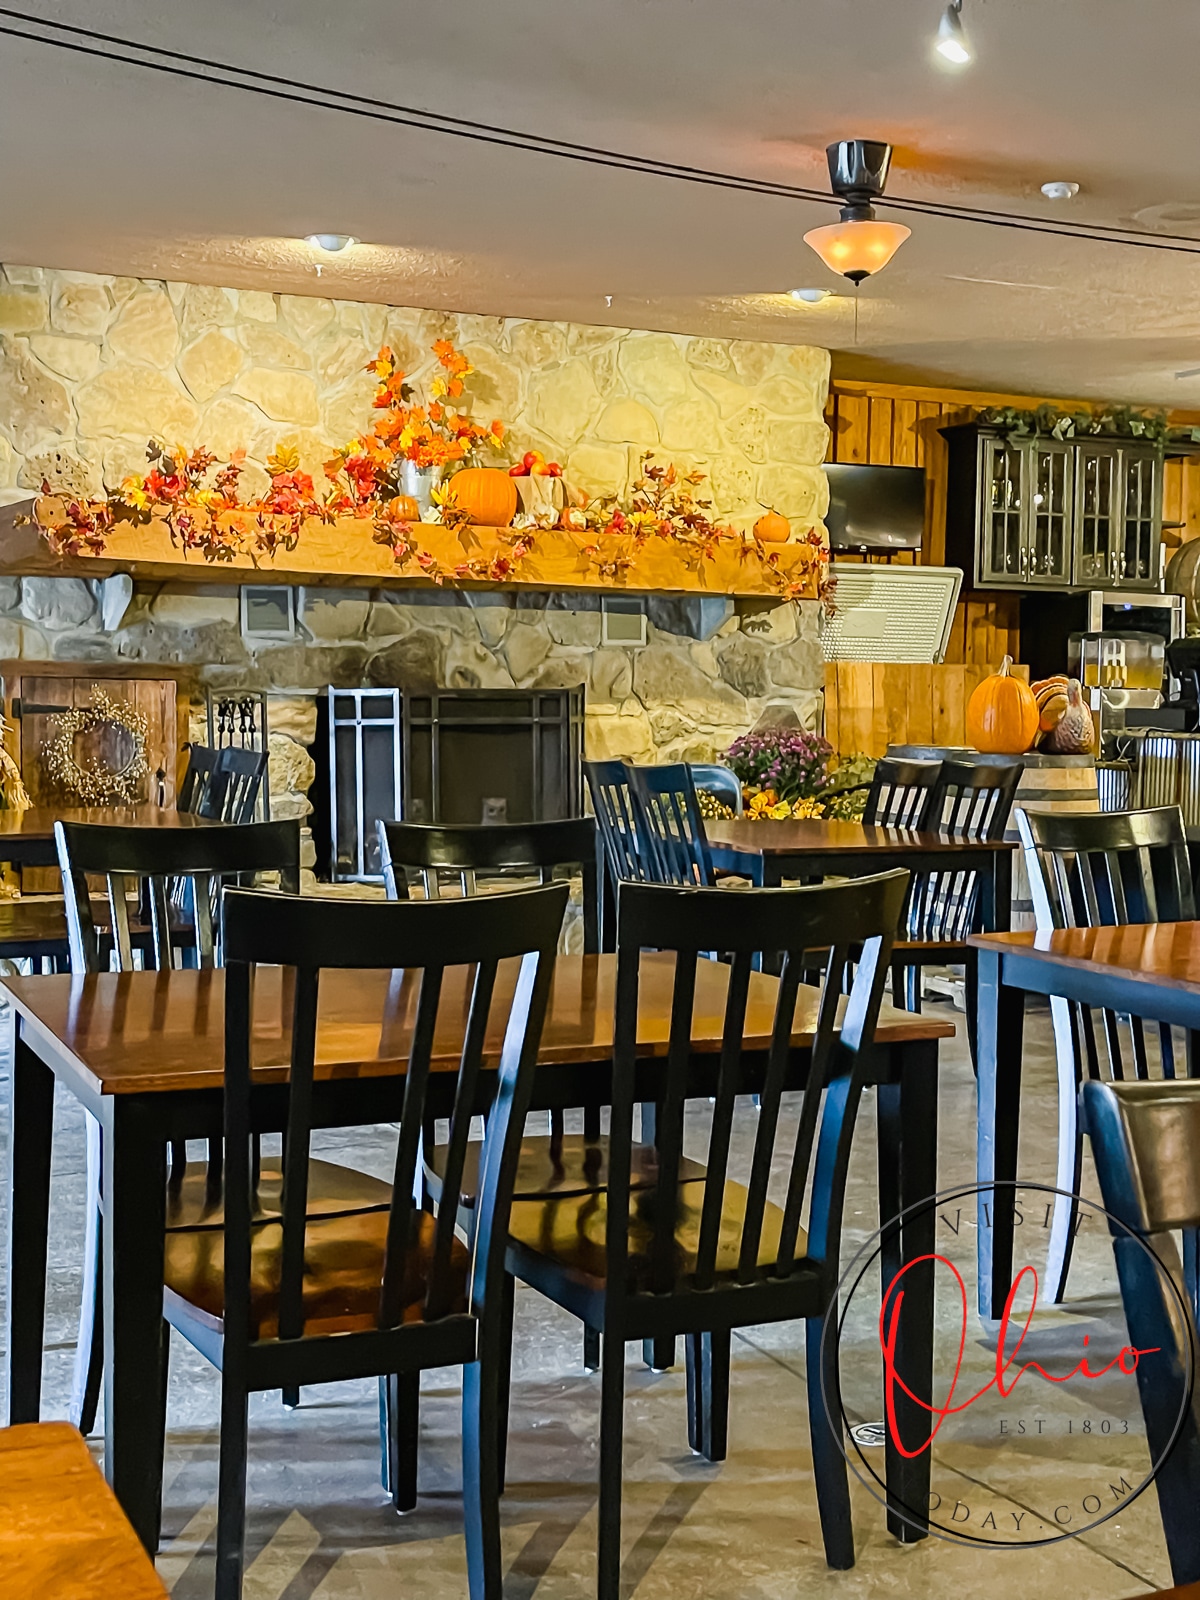 Picture of the inside of spring hill winery. black chairs and wooden tables, pumpkin and straw fall decor on stone fireplace Photo credit: Cindy Gordon of VisitOhioToday.com